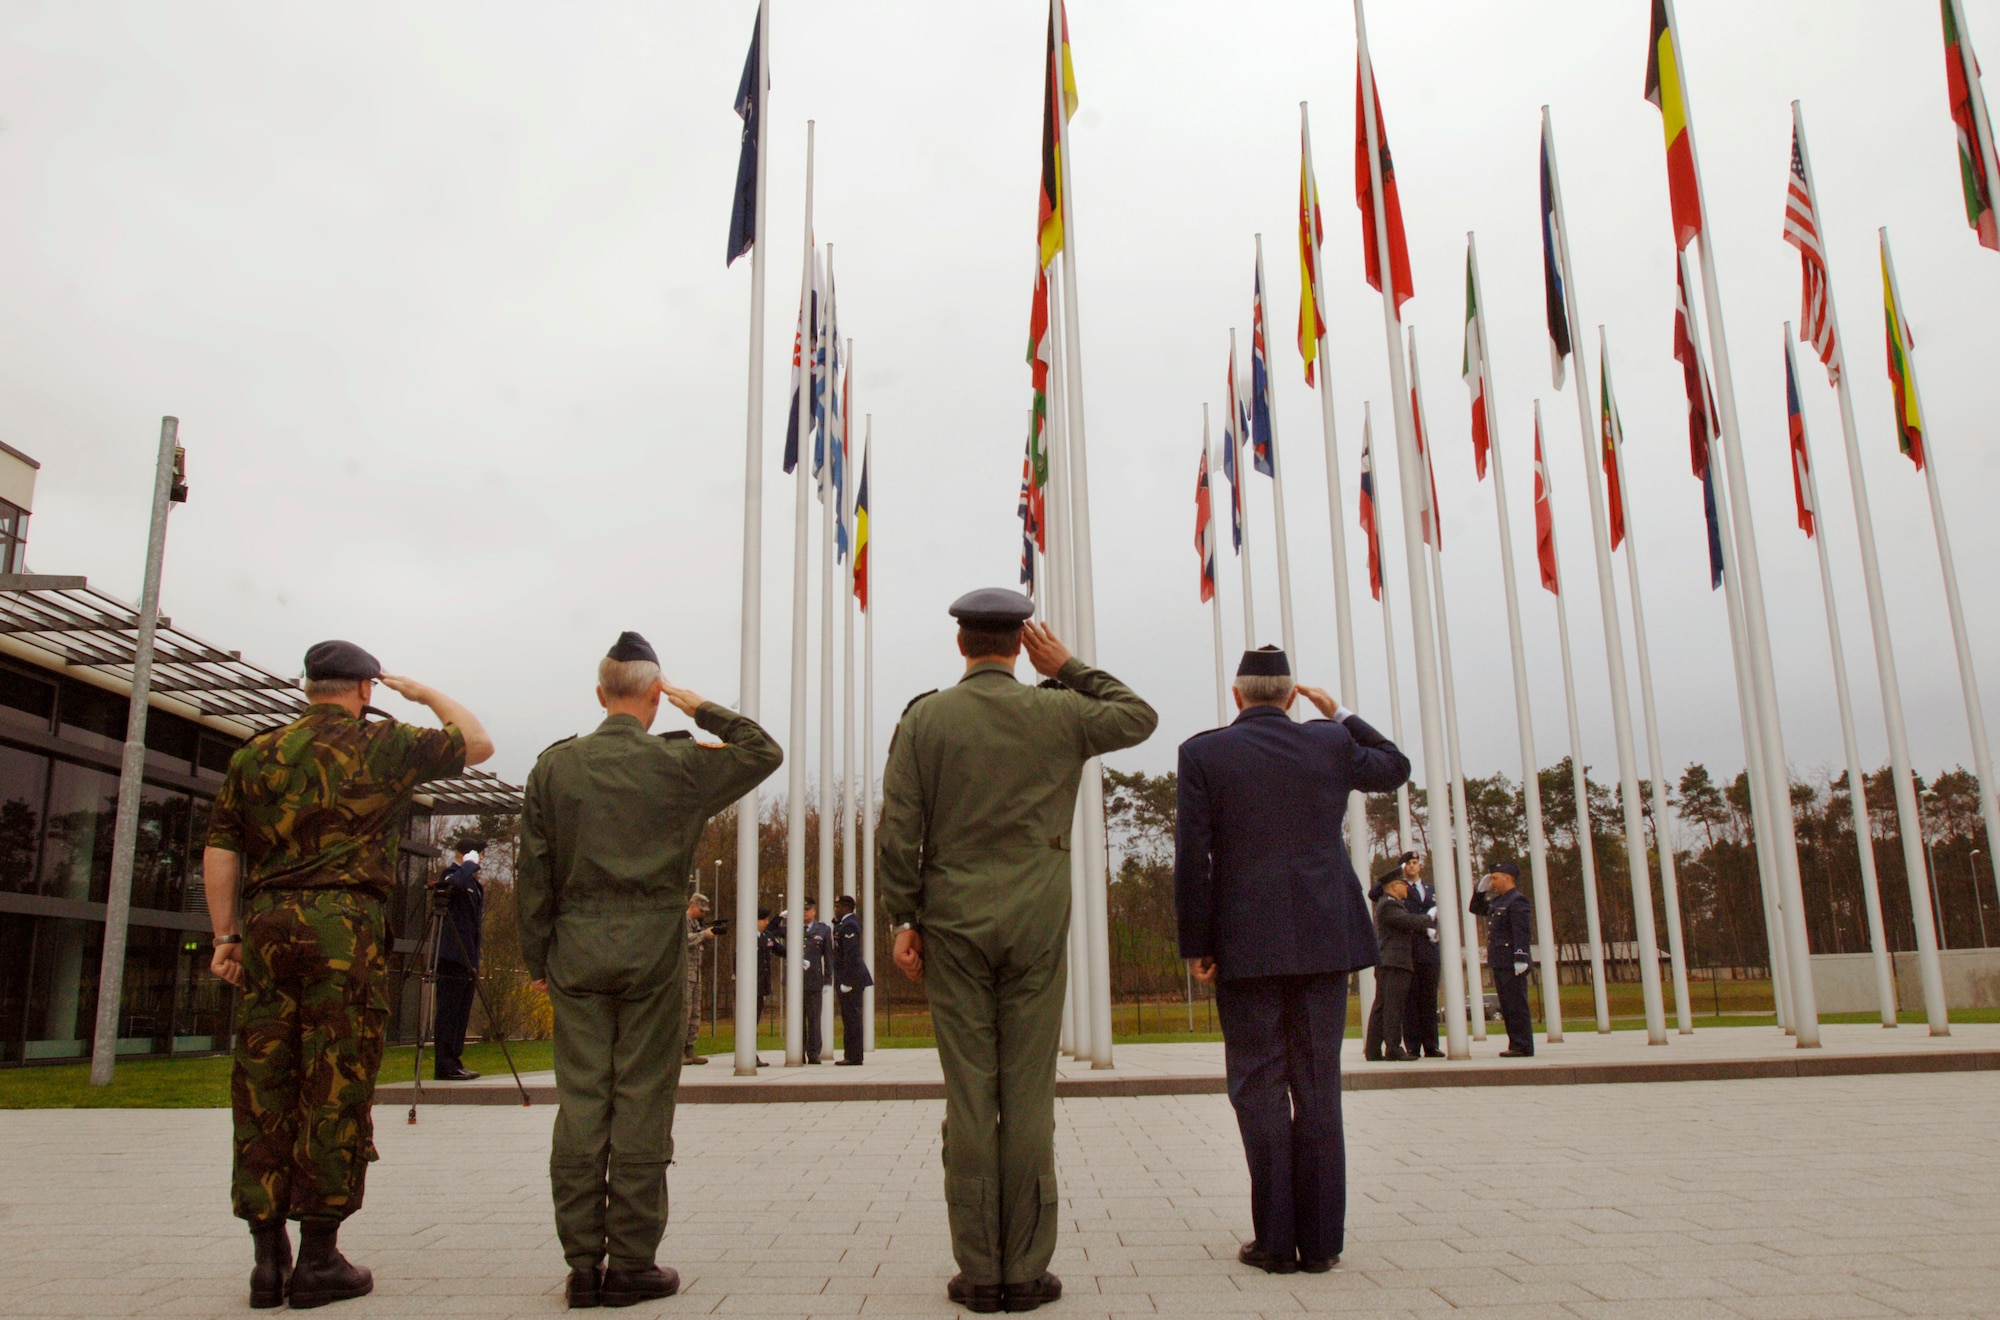 NATO Allied Air Component Command officials at Ramstein Air Base, Germany, salute during a flag ceremony April 8 marking the accession of Croatia and Albania as the 27th and 28th members of the alliance. Shown are (l to r) Warrant Officer Tim van der Loght, AACC's senior noncommissioned officer; Maj. Gen. Jon Abma, AACC's chief of staff; Air Marshal David Walker, AACC deputy commander; and Gen. Roger A. Brady, commander of U.S. Air Forces in Europe and AACC. (Defense Department photo/Master Sgt. Scott Wagers)